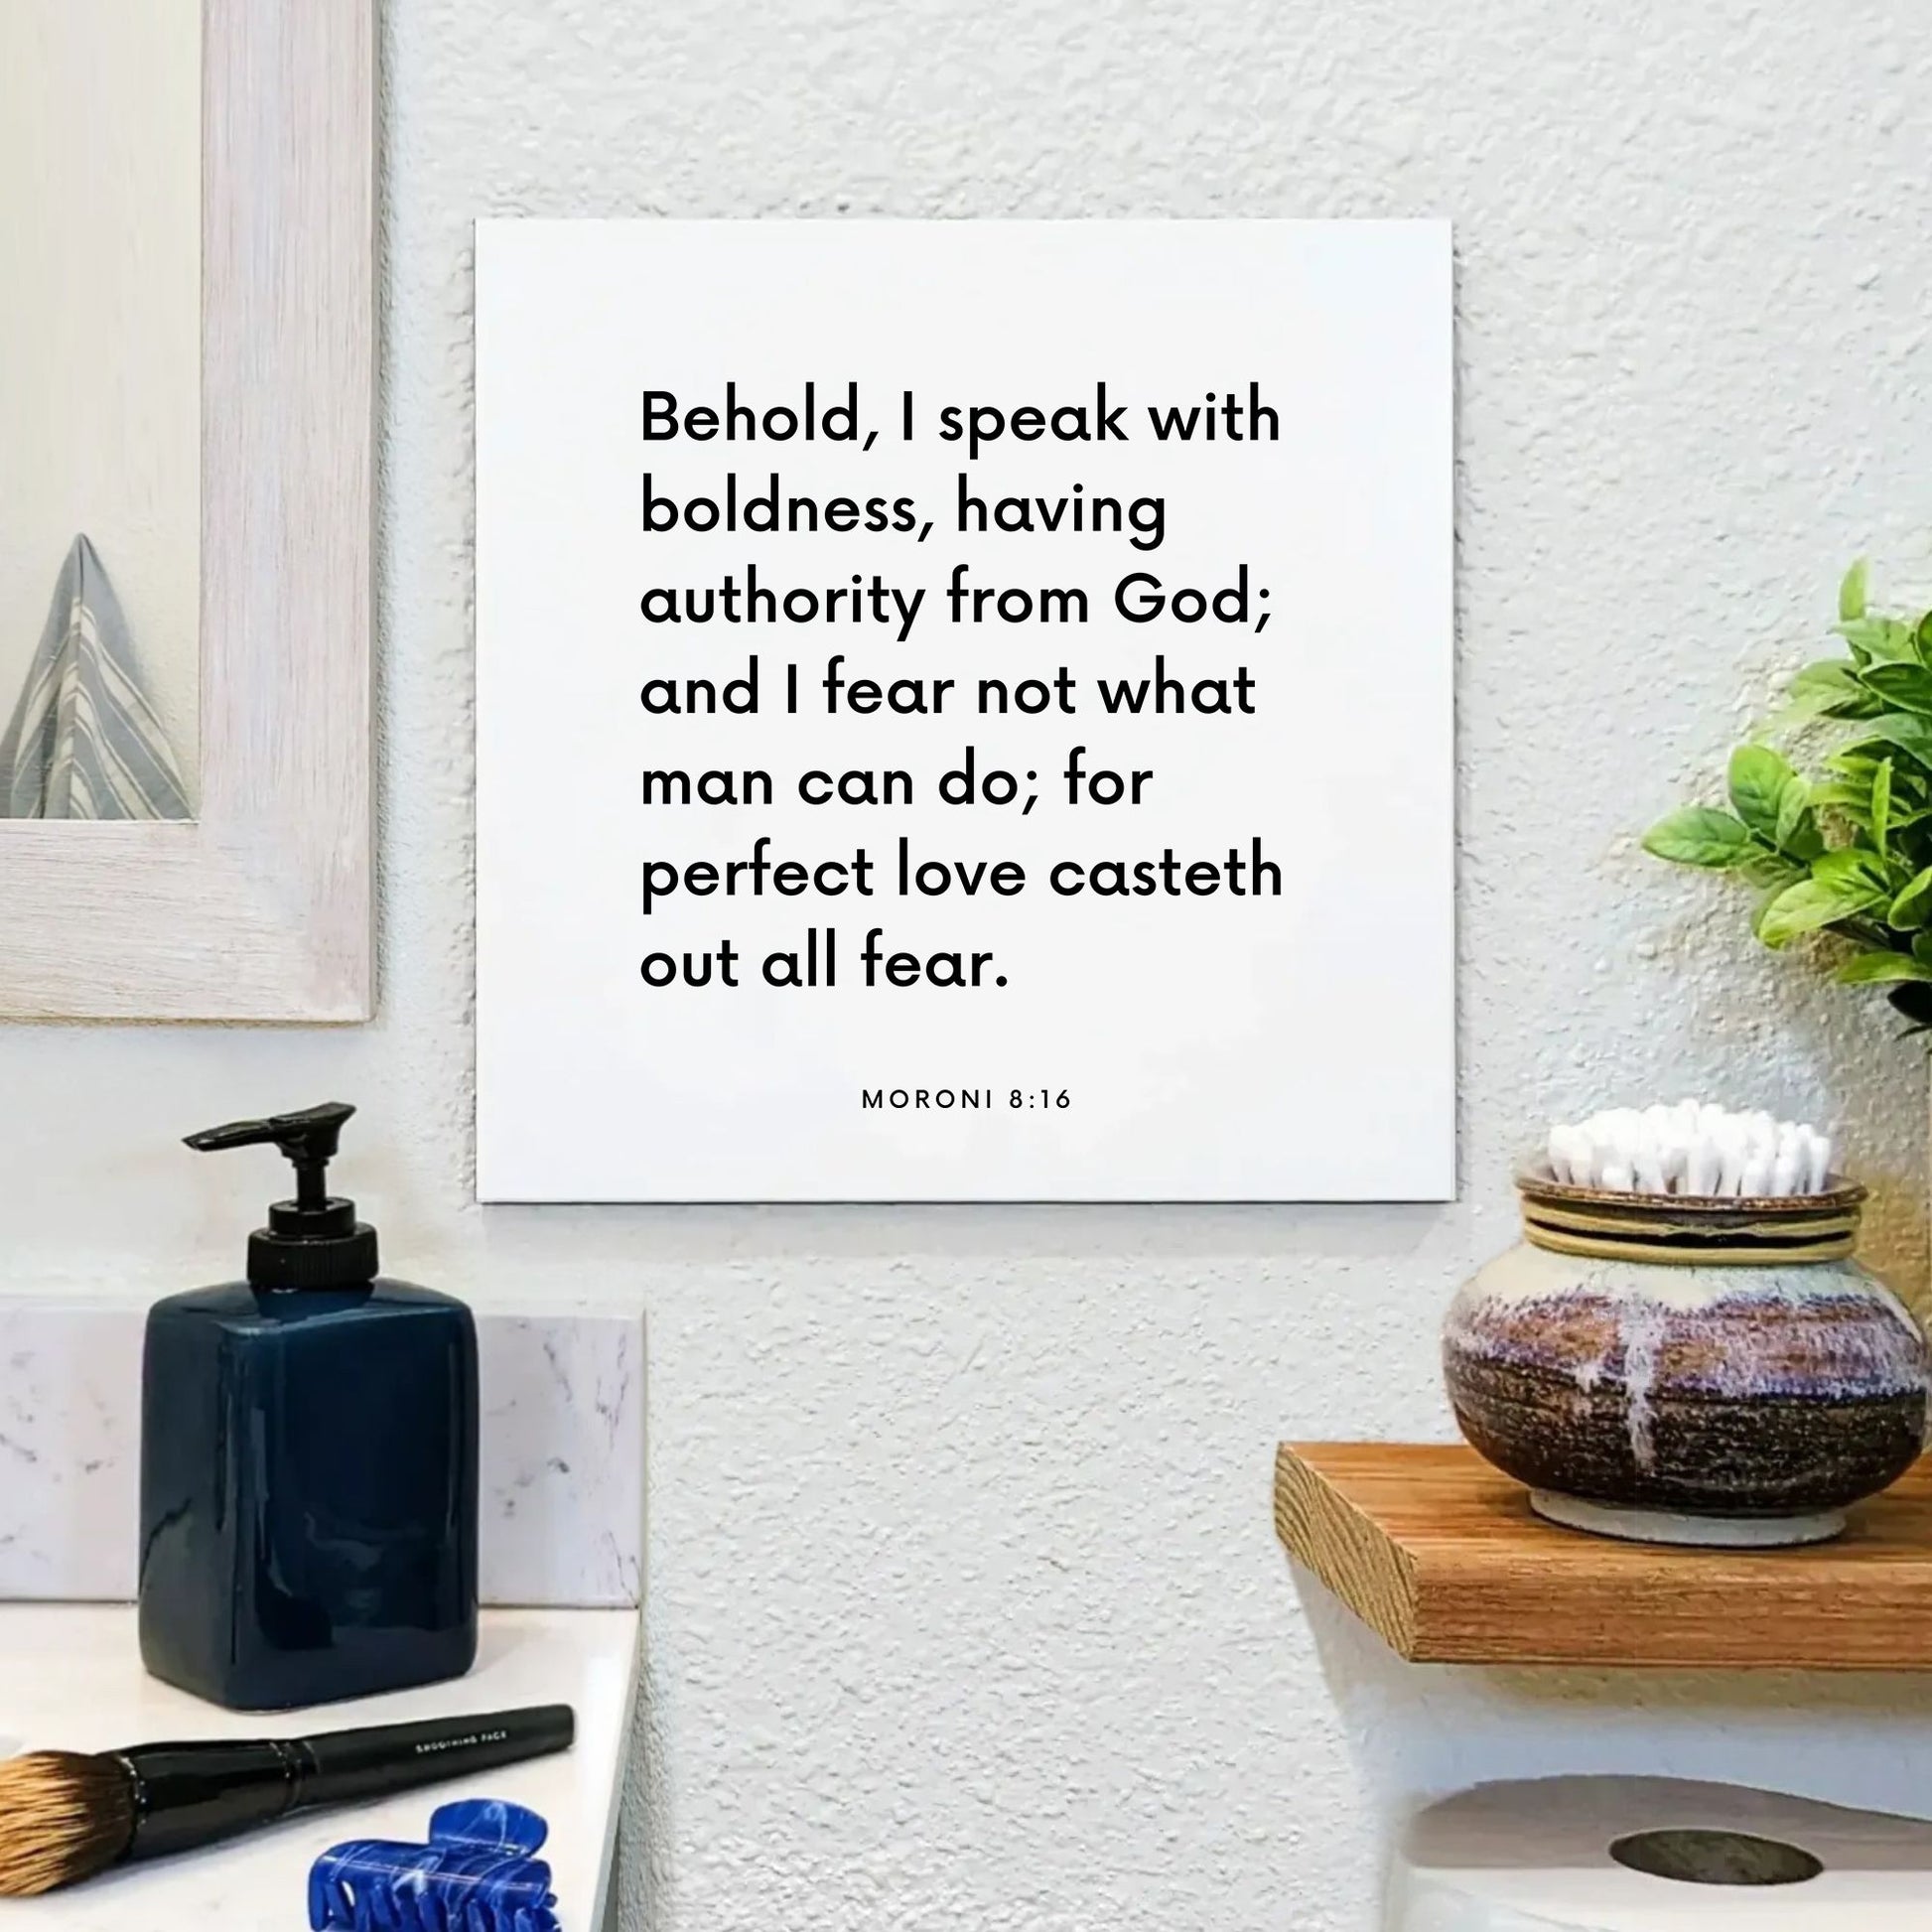 Bathroom mouting of the scripture tile for Moroni 8:16 - "Behold, I speak with boldness, having authority from God"